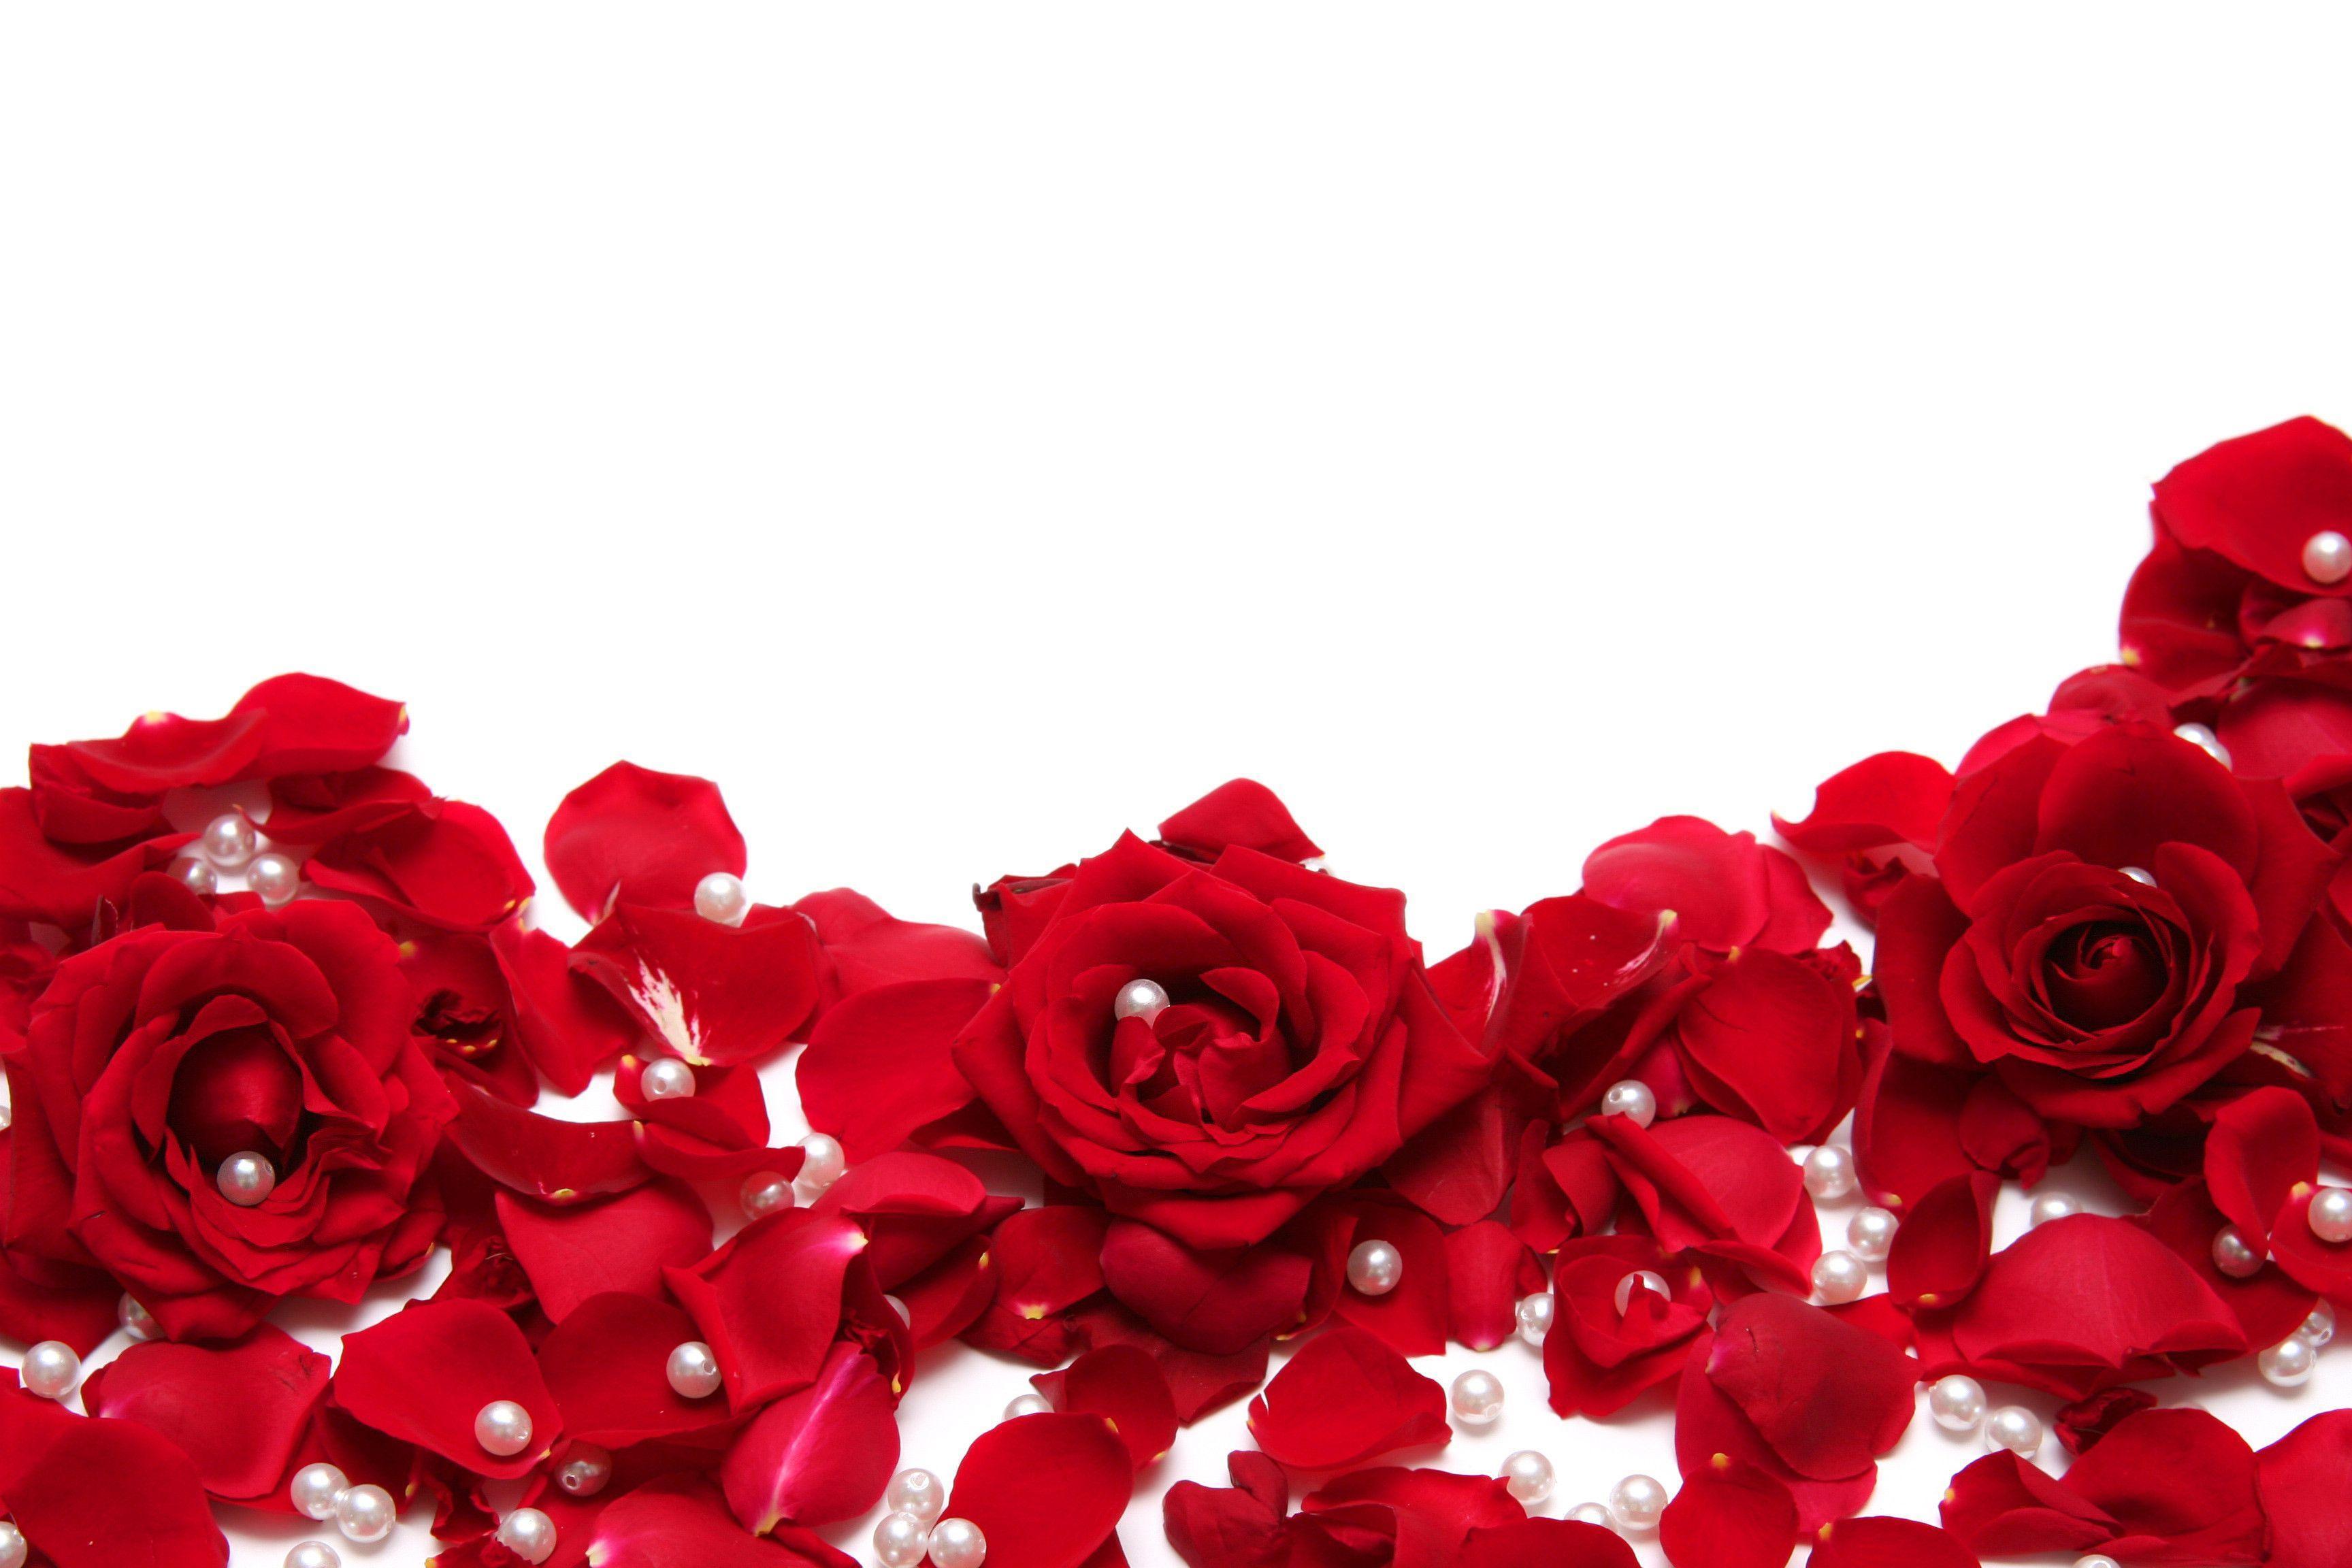 red and white roses wallpaper desktop background